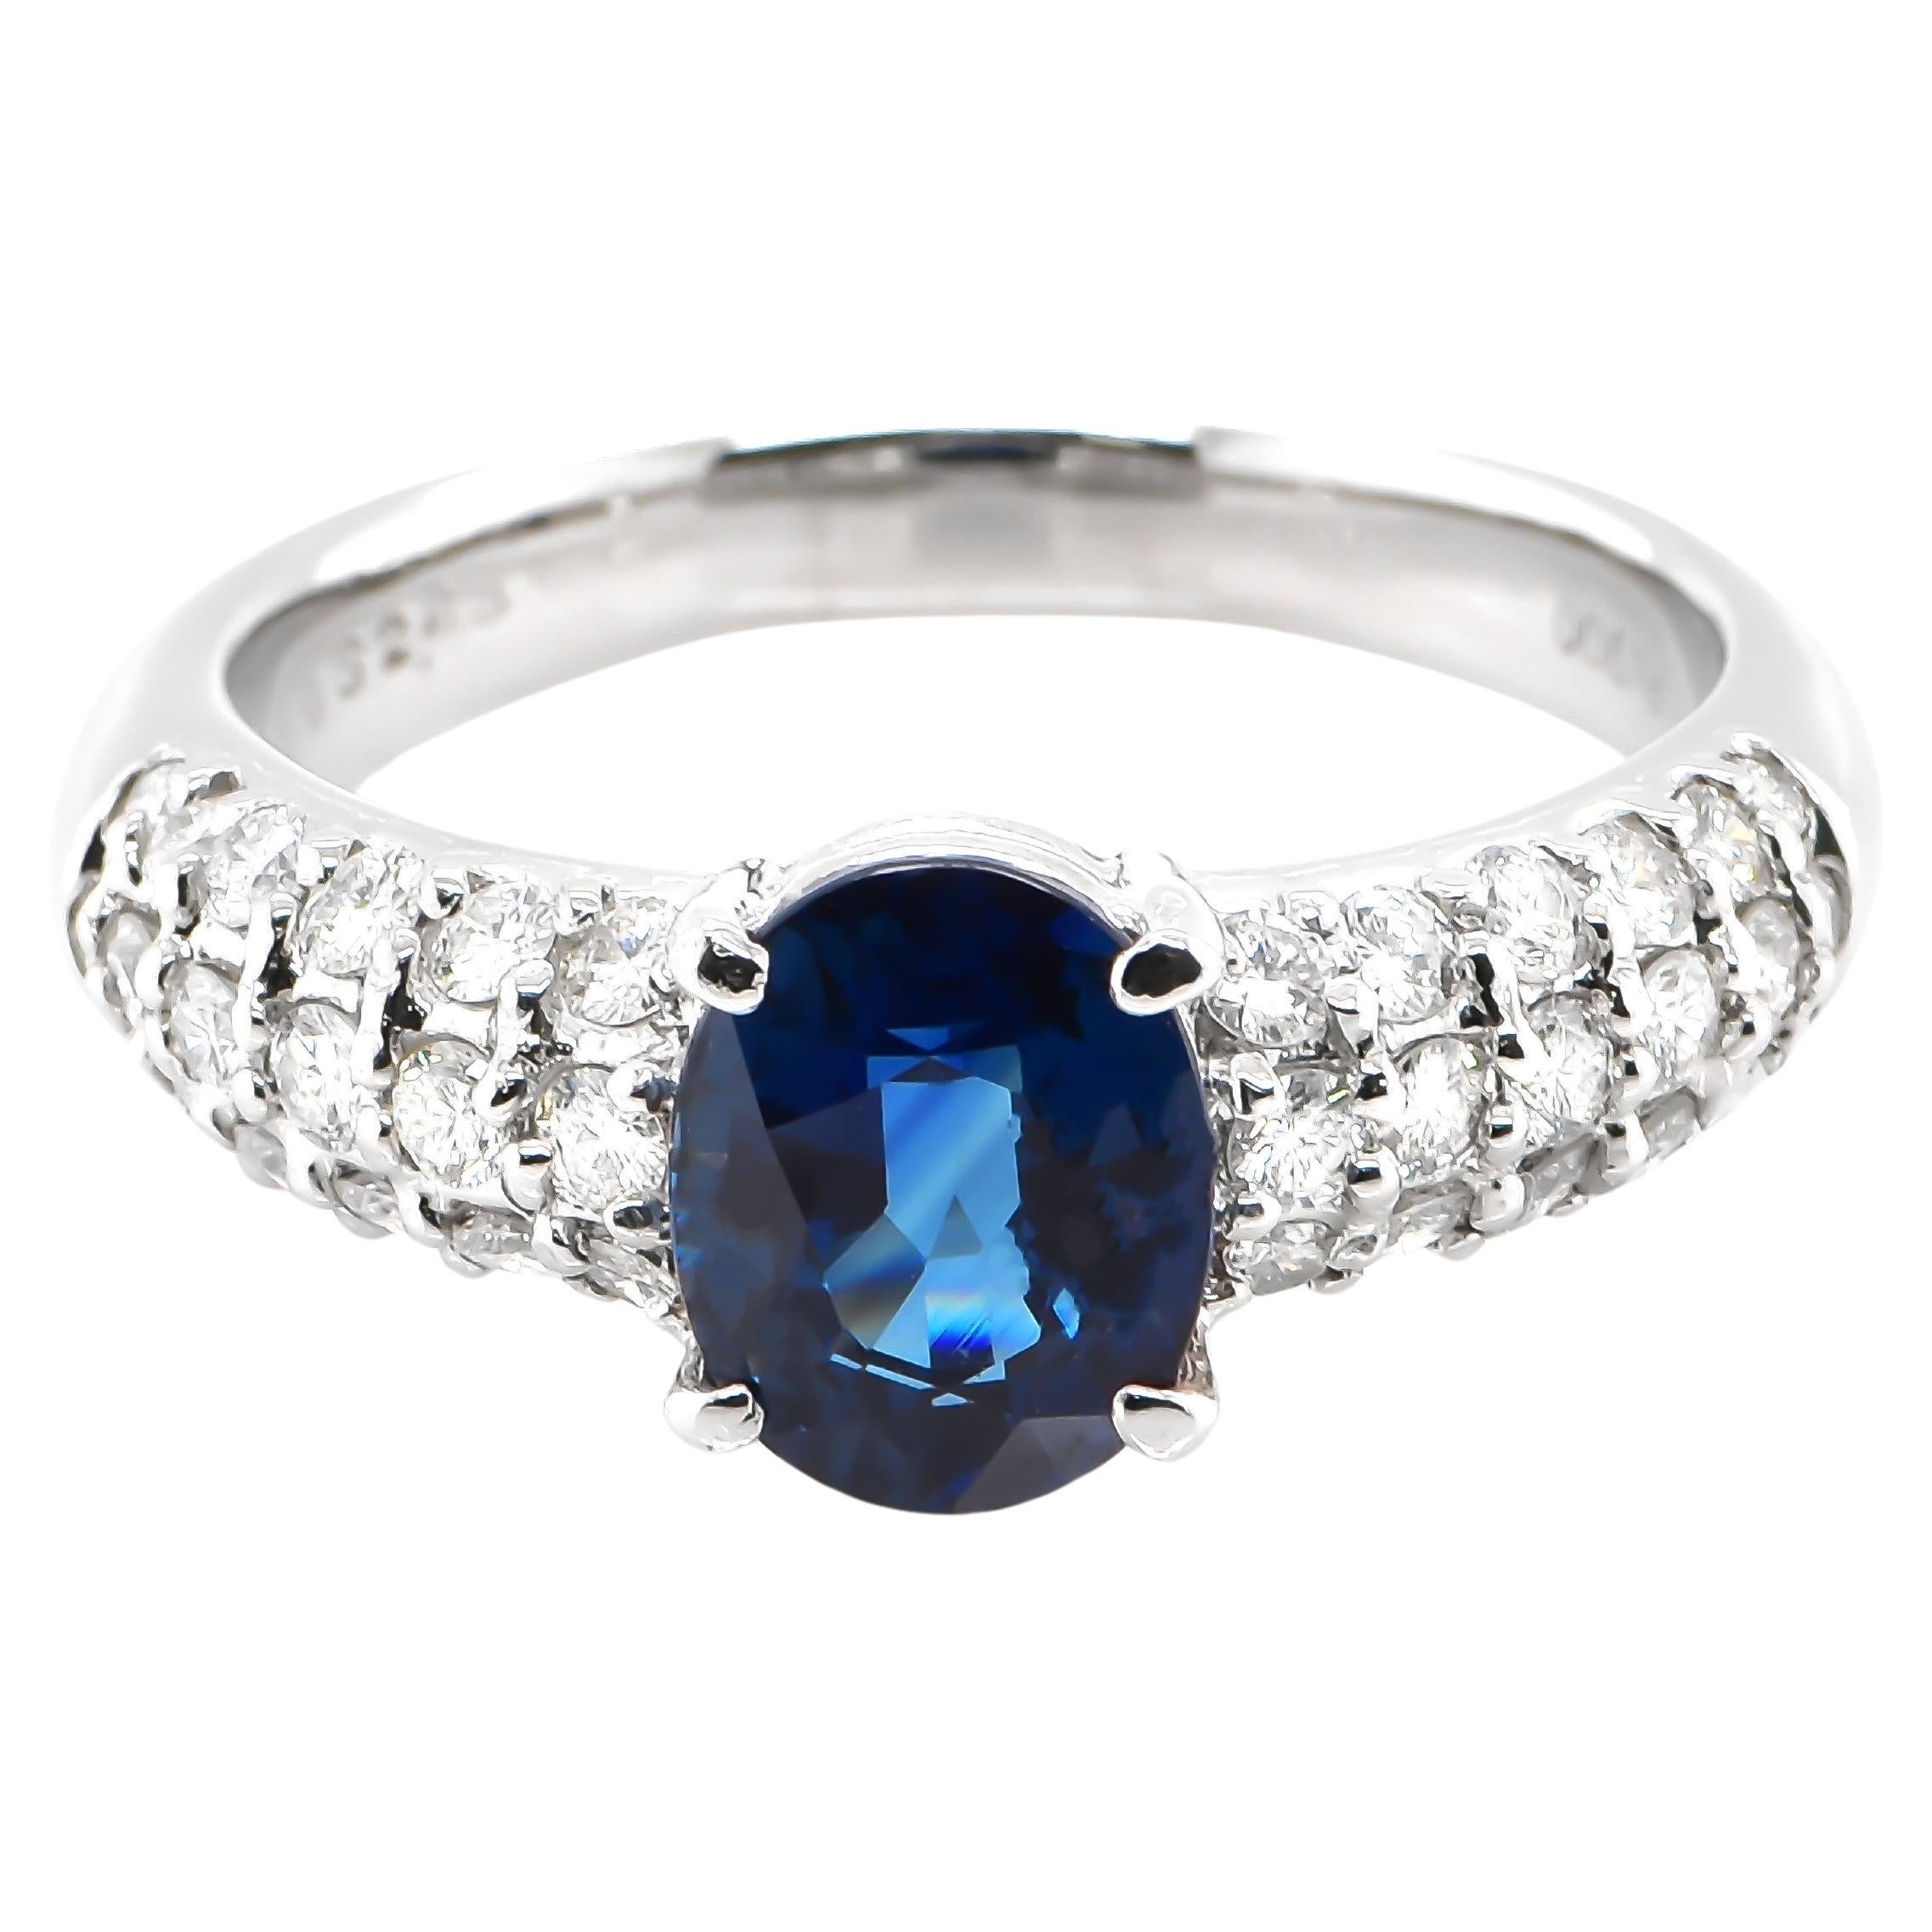 2.25 Carat Natural Blue Sapphire and Diamond Cocktail Ring Made in Platinum For Sale